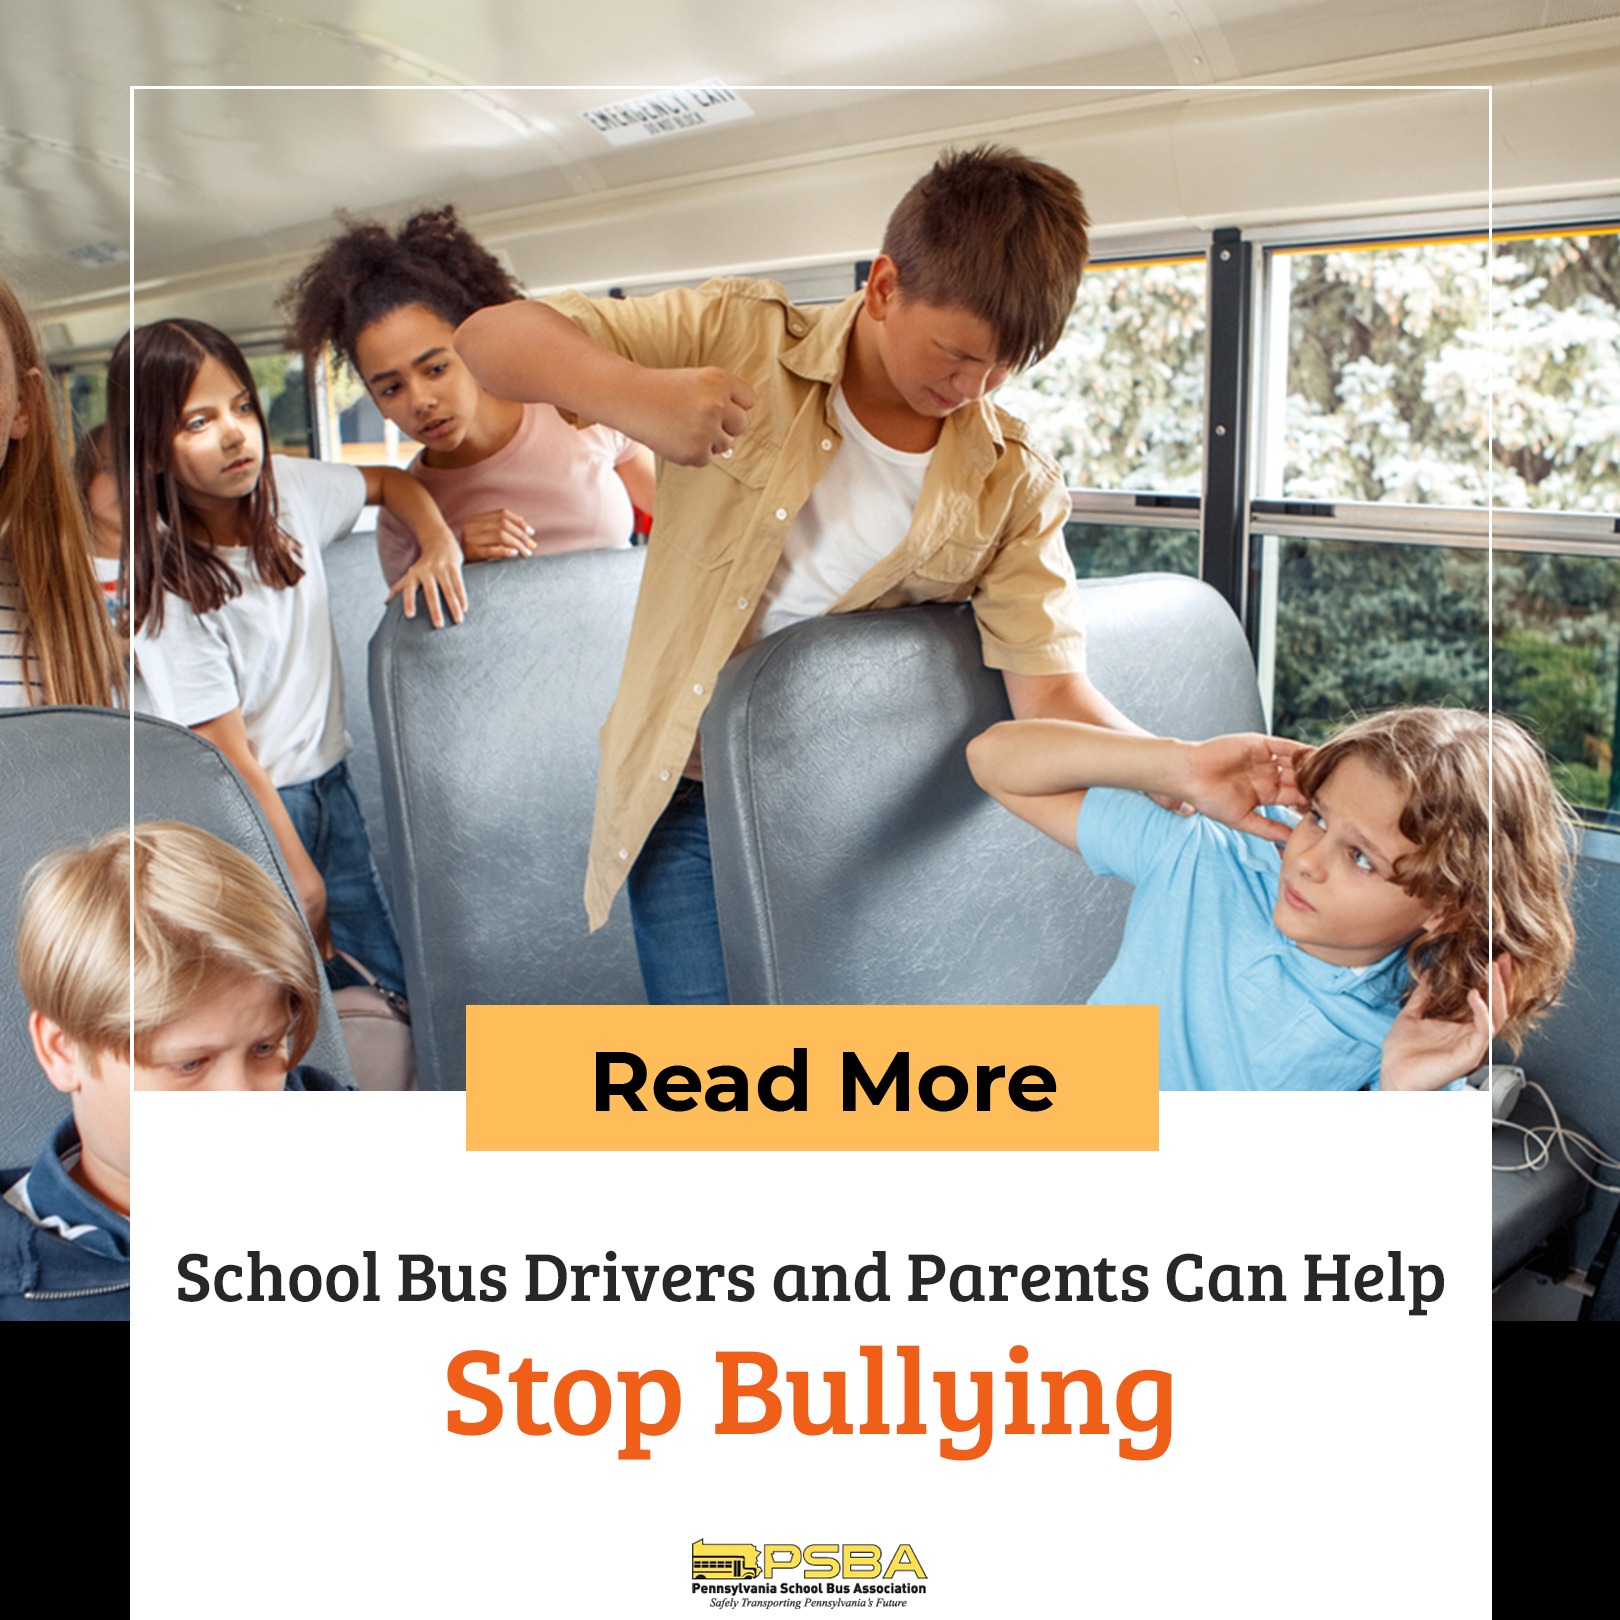 School Bus Drivers and Parents Can Help Stop Bullying